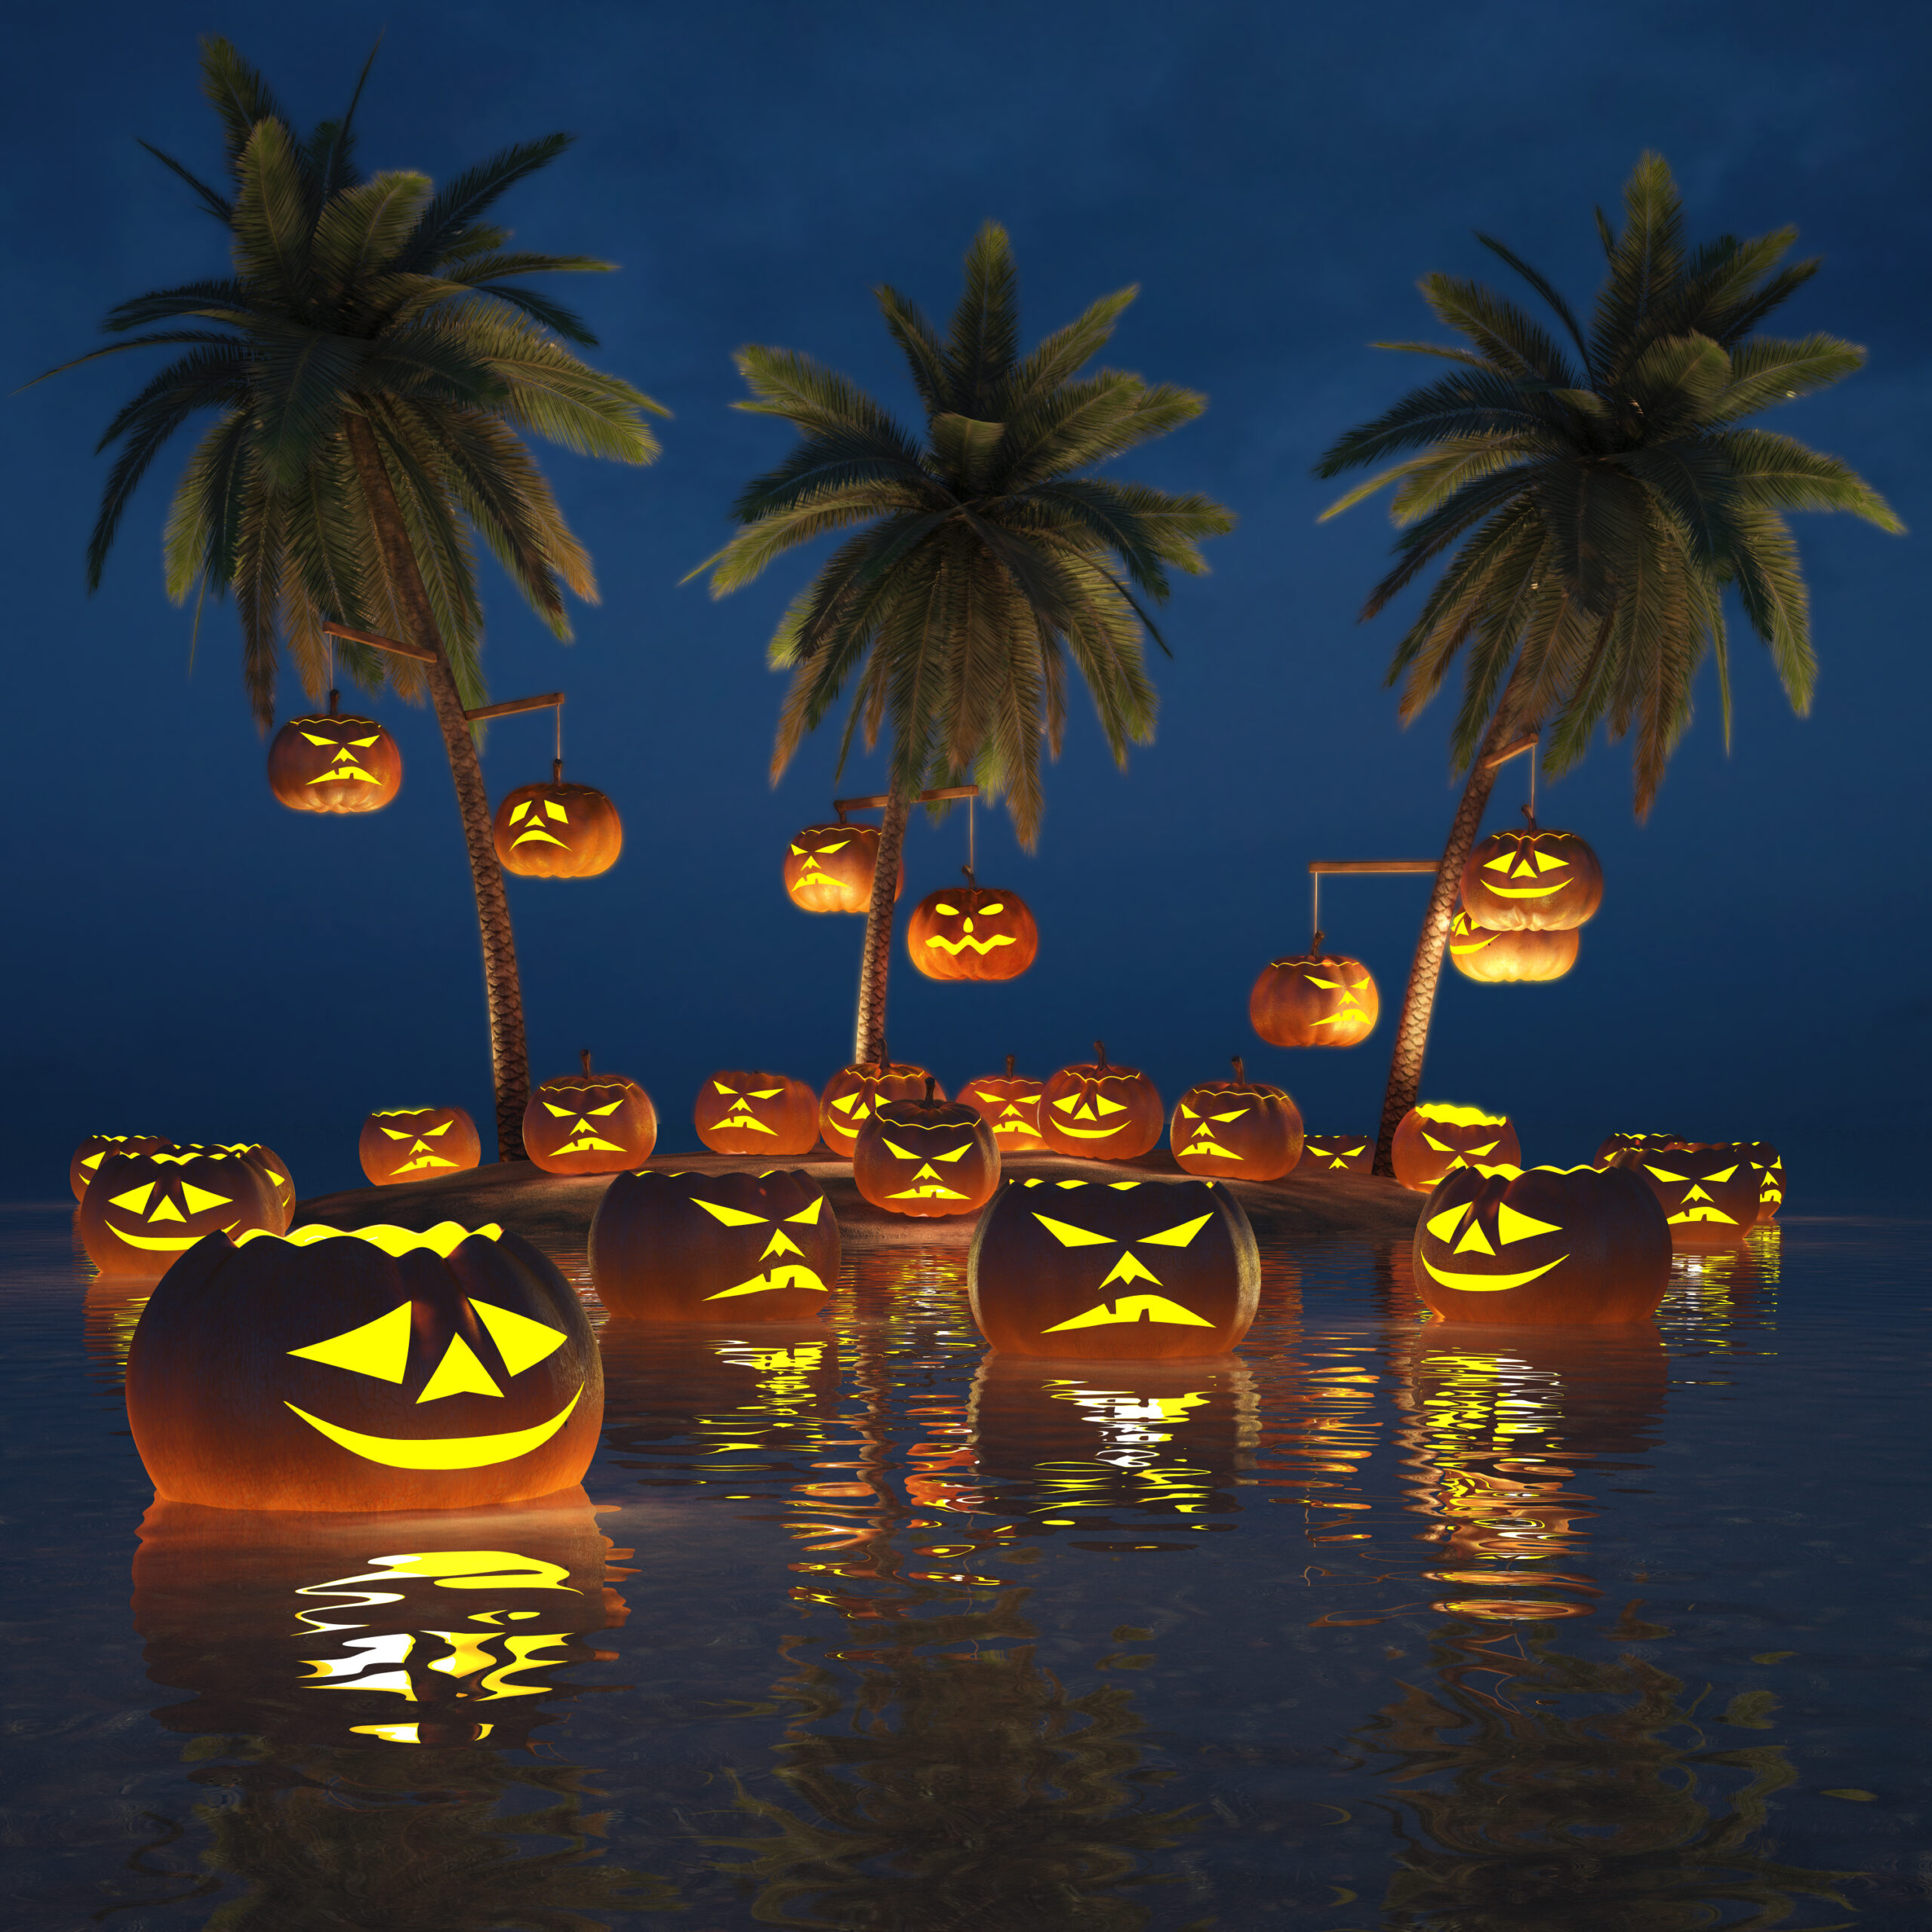 A guide to Halloween in South Florida